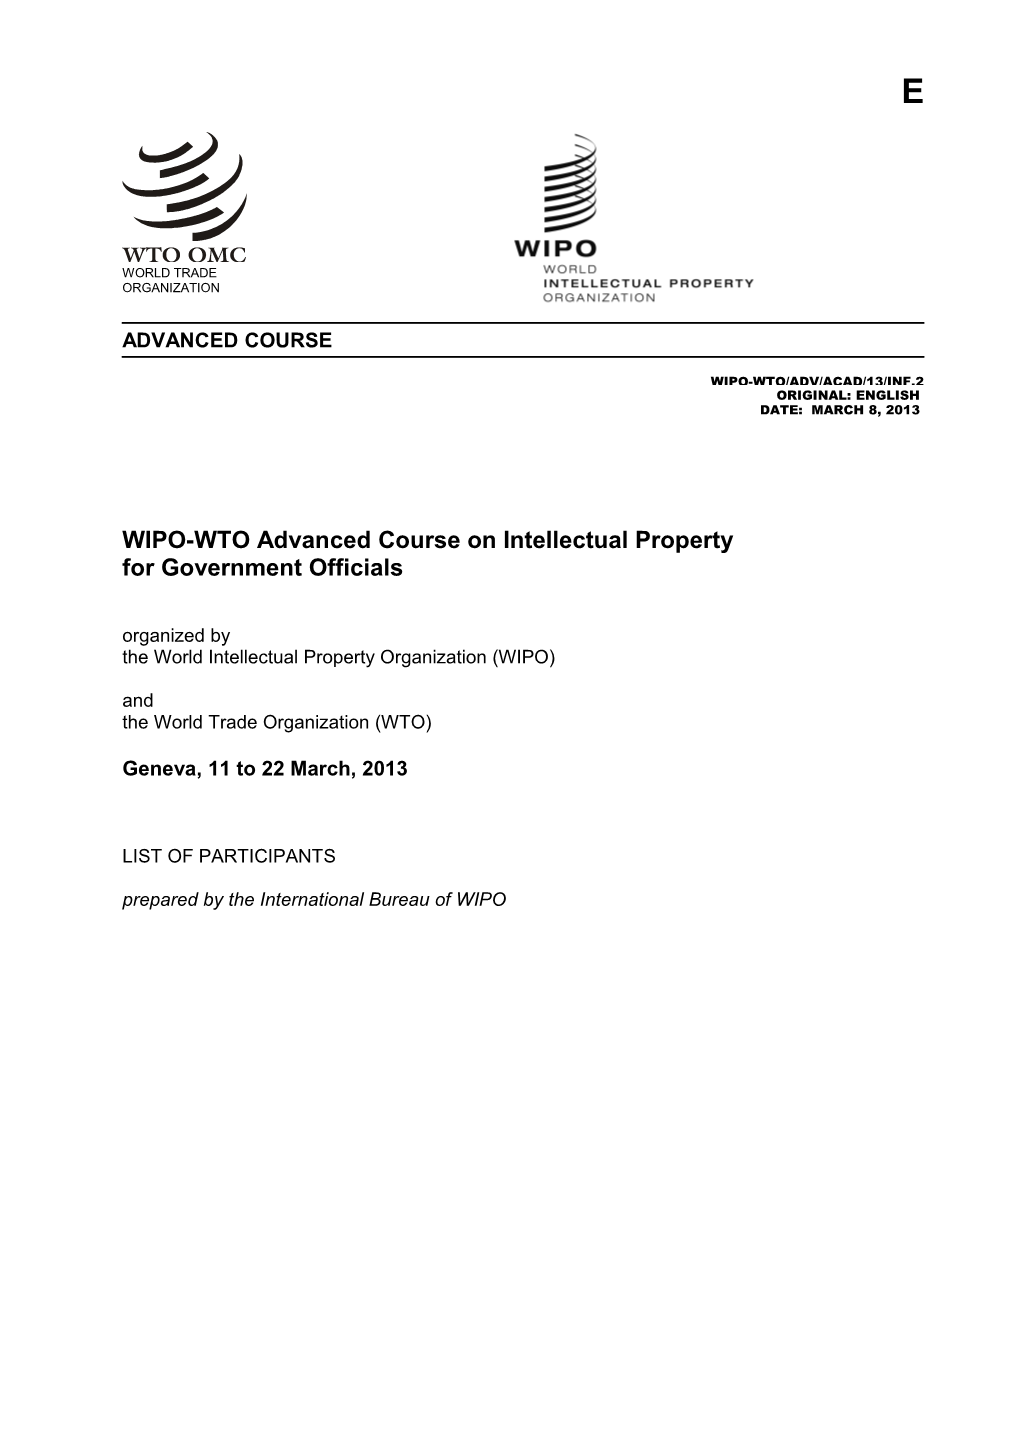 WIPO-WTO Advanced Course on Intellectual Property